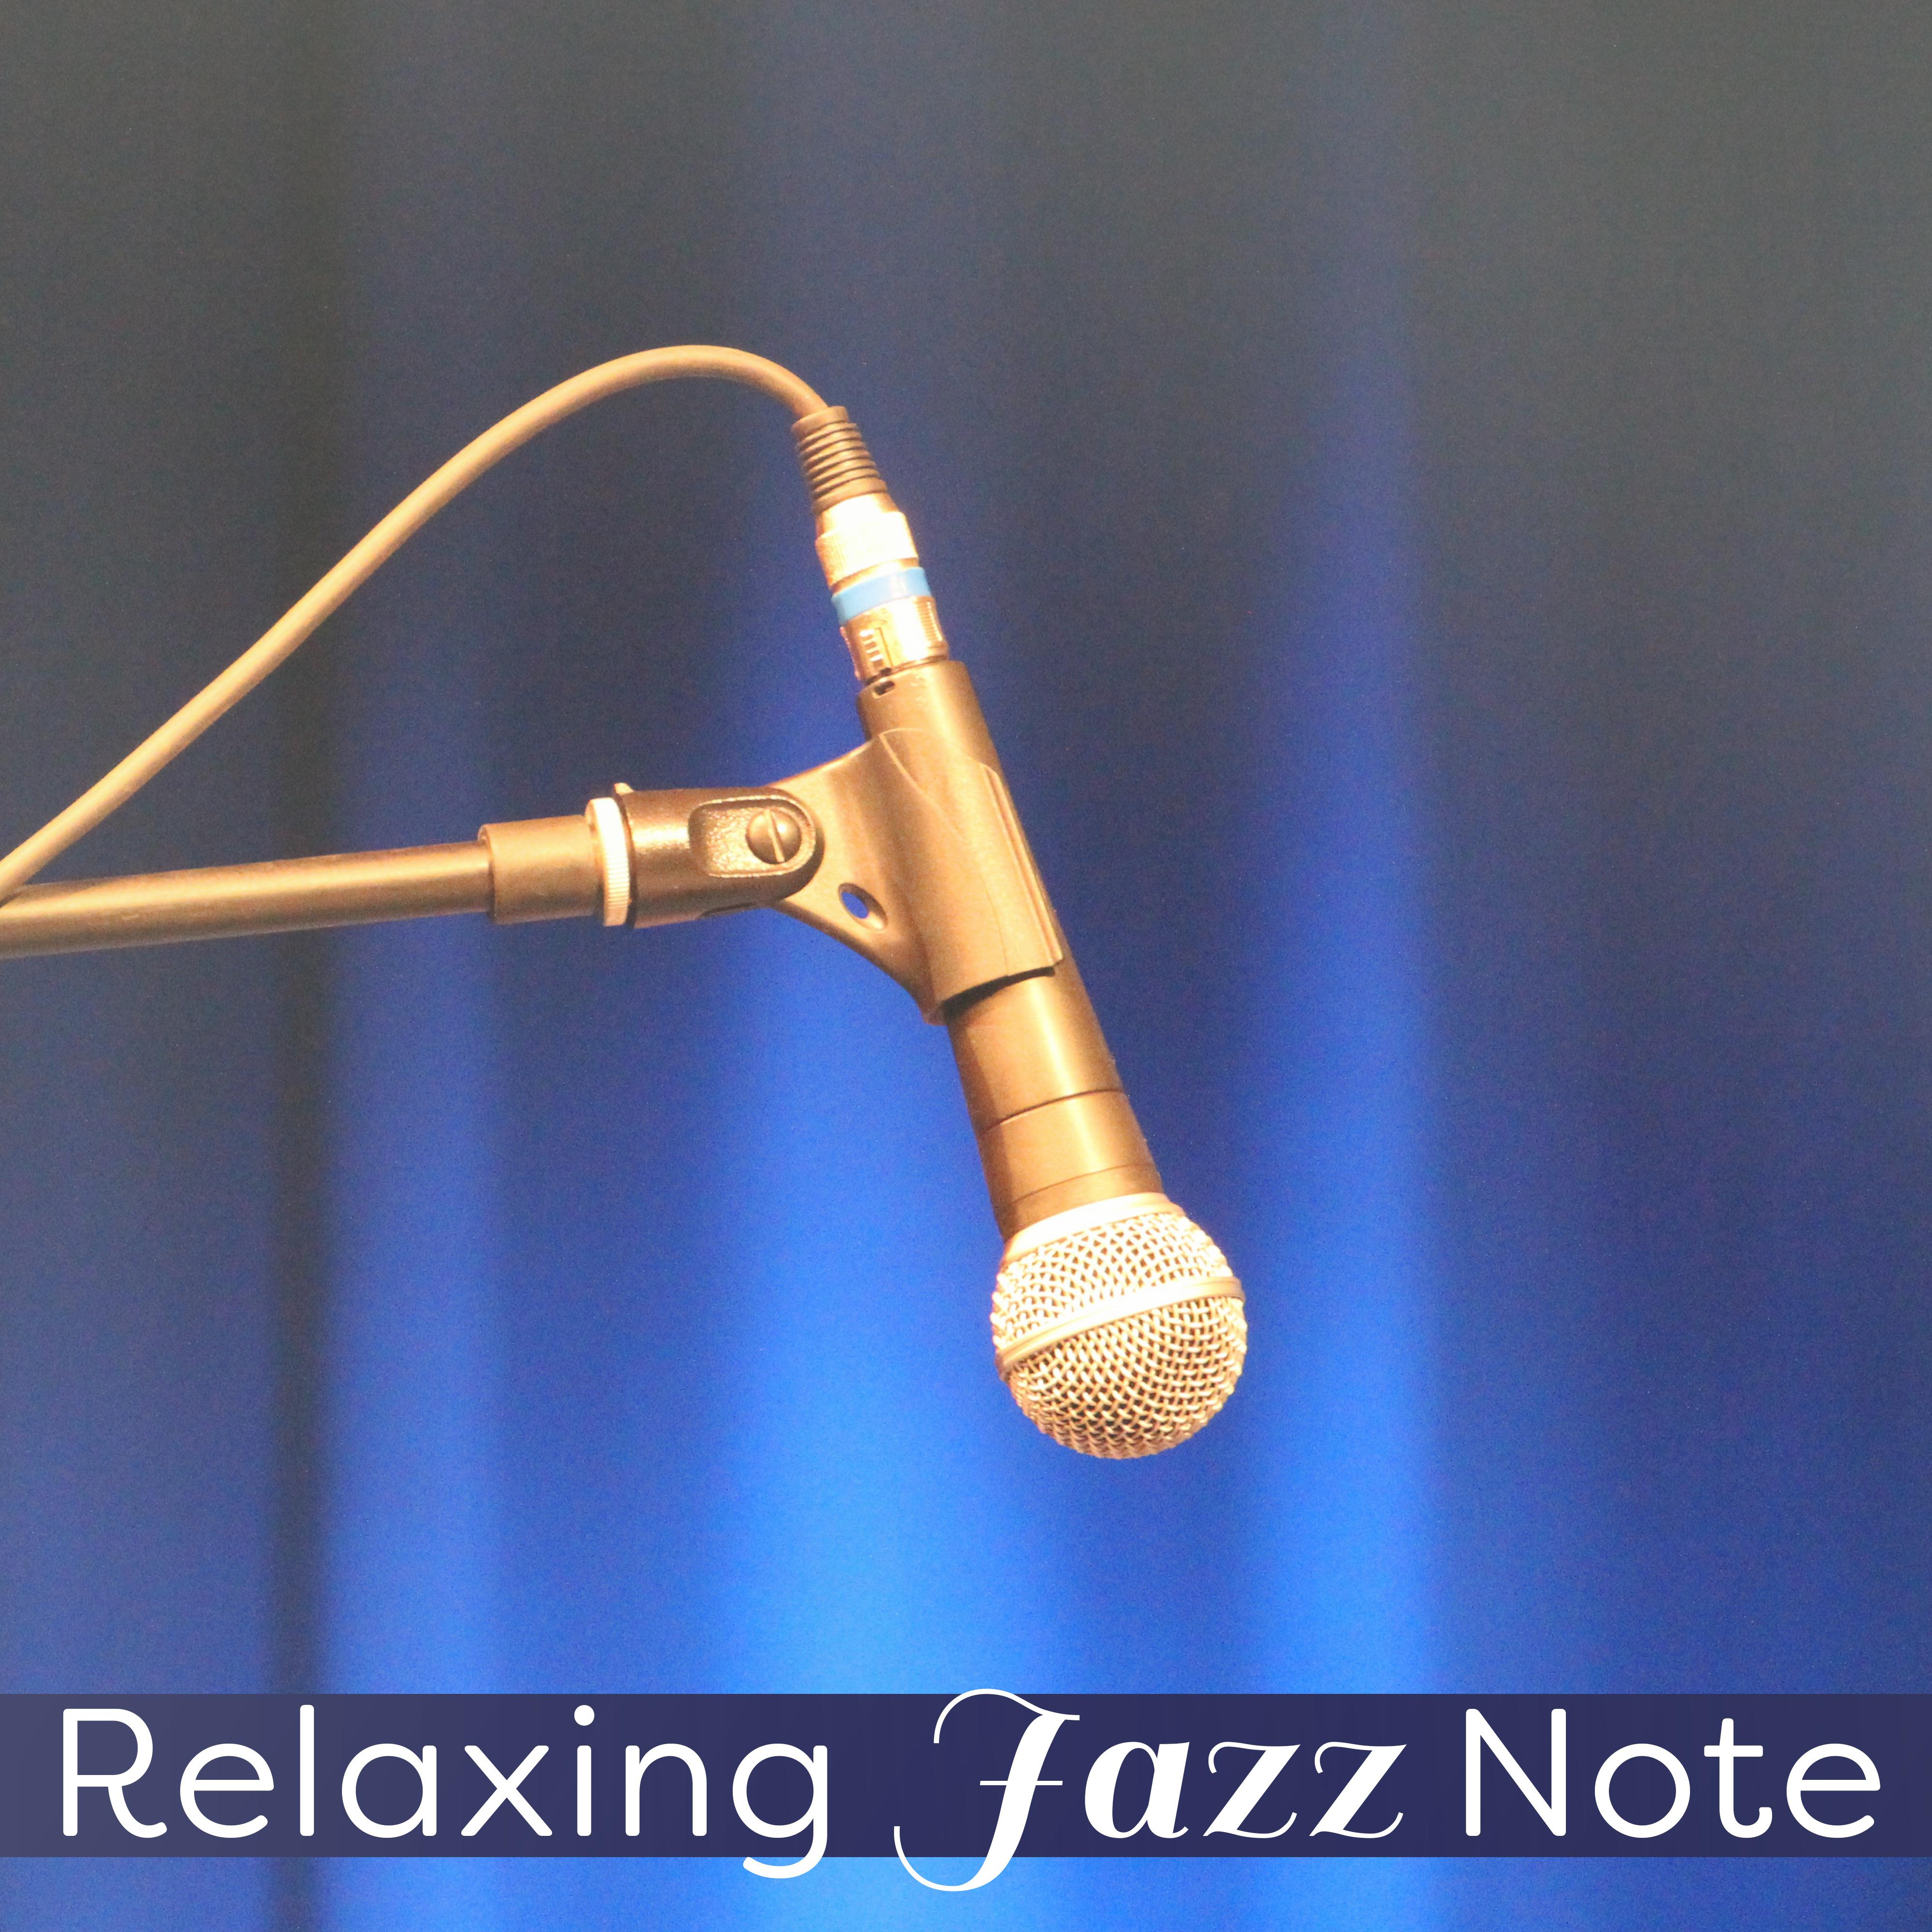 Relaxing Jazz Note  Smooth Sounds to Rest, Calm Down with Jazz Music, Chilled Sounds, Mellow Piano